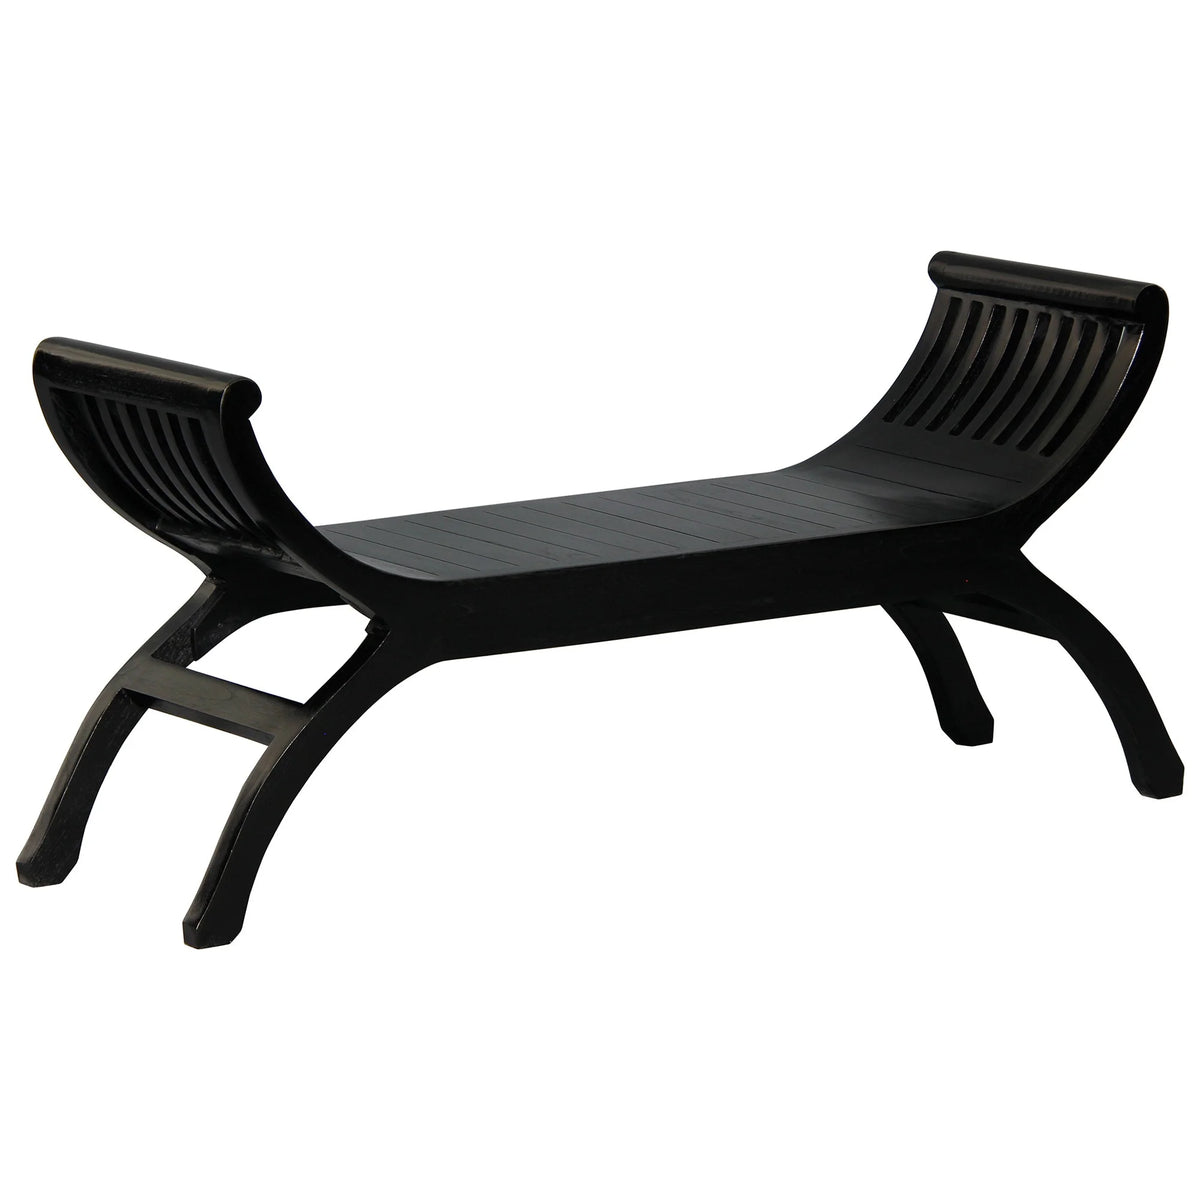 Maeve Timber 2 Seater Curved Bench - Black - Notbrand